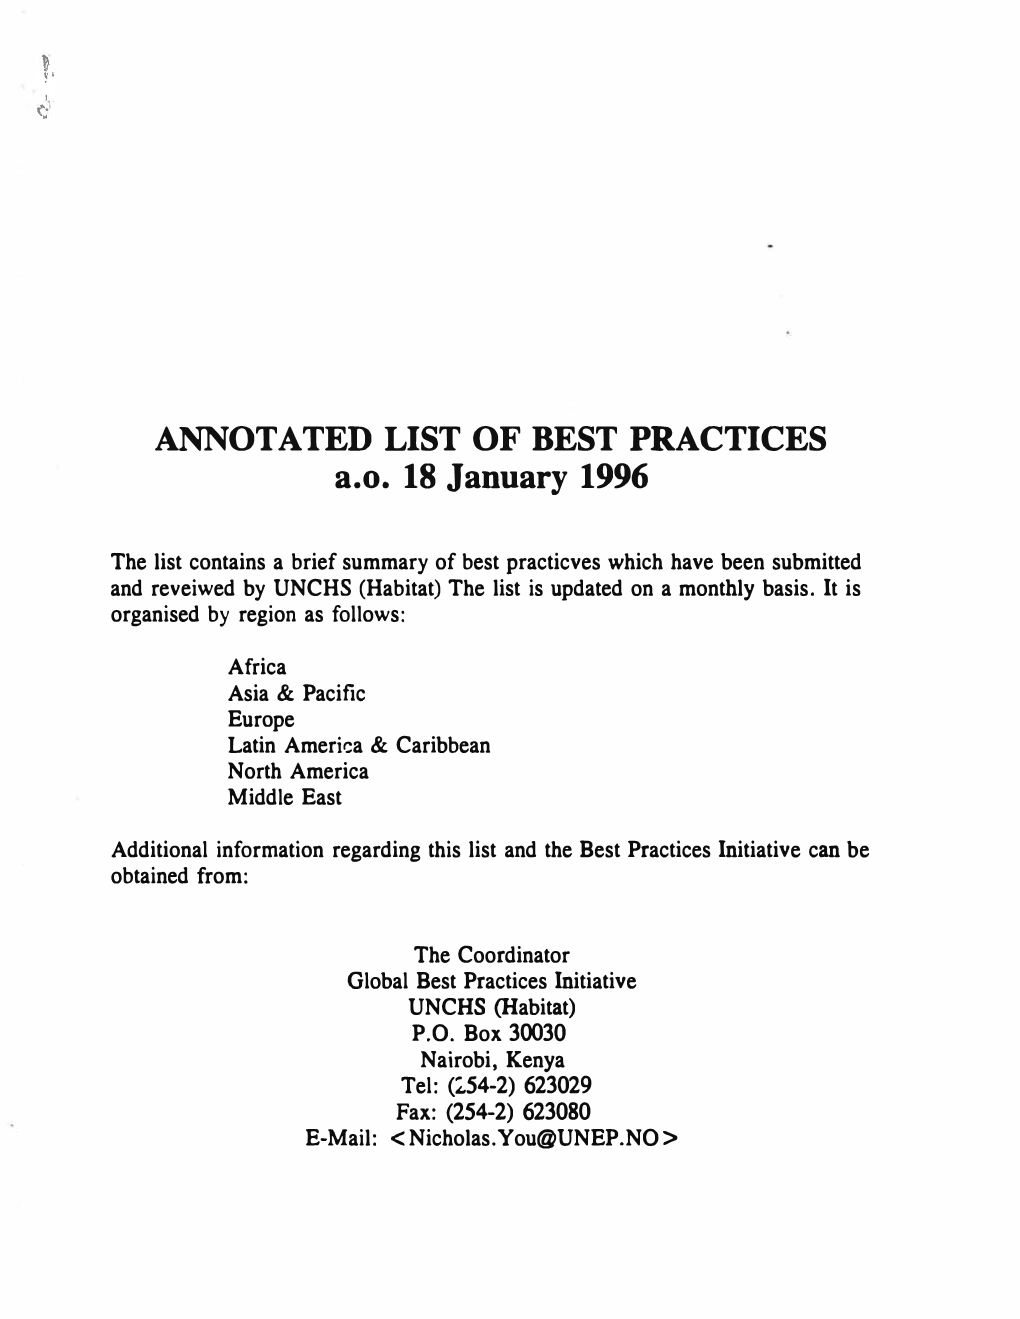 ANNOTATED LIST of BEST PRACTICES A.O. 18 January 1996